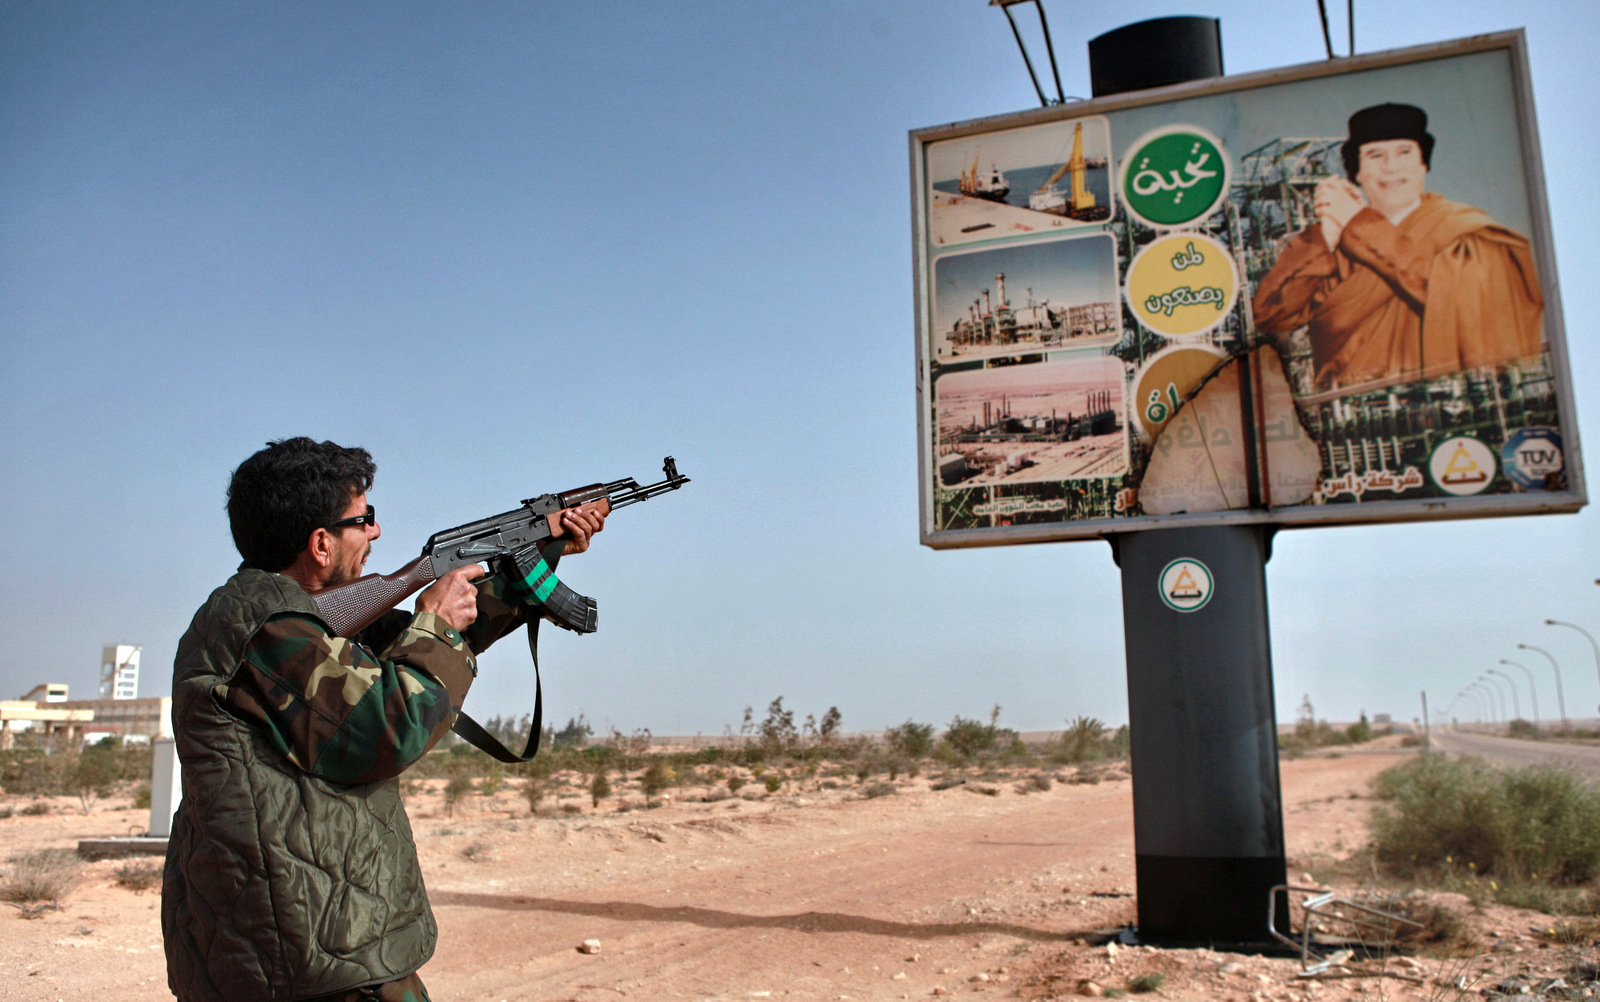 An armed Libyan rebel shoots an AK-47 at a poster of Muhammar Gaddafi in the captured rebel town of Ras-Lanuf in the east of the country (Photo: Andrey Stenin/Sputnik)